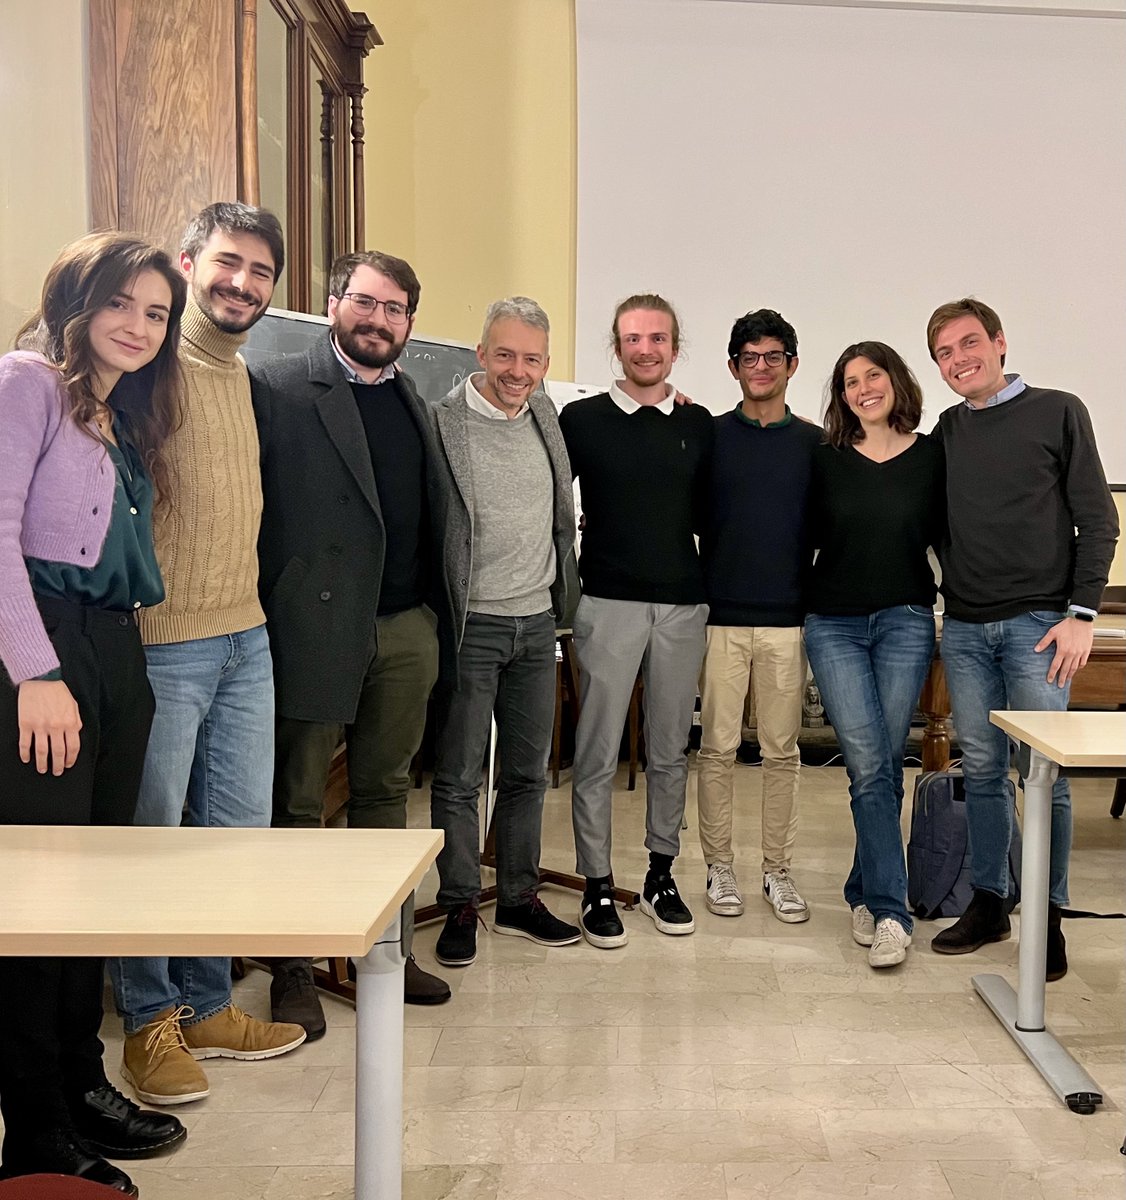 #publichealth values and perspectives at the centre of the seminar 'Health systems for a global future' by @ecapobianco, from @WHOFoundation. His advice is always inspiring for young #PH professionals. Thanks to @ghislieri_pavia for organising such exciting meetings with alumni.